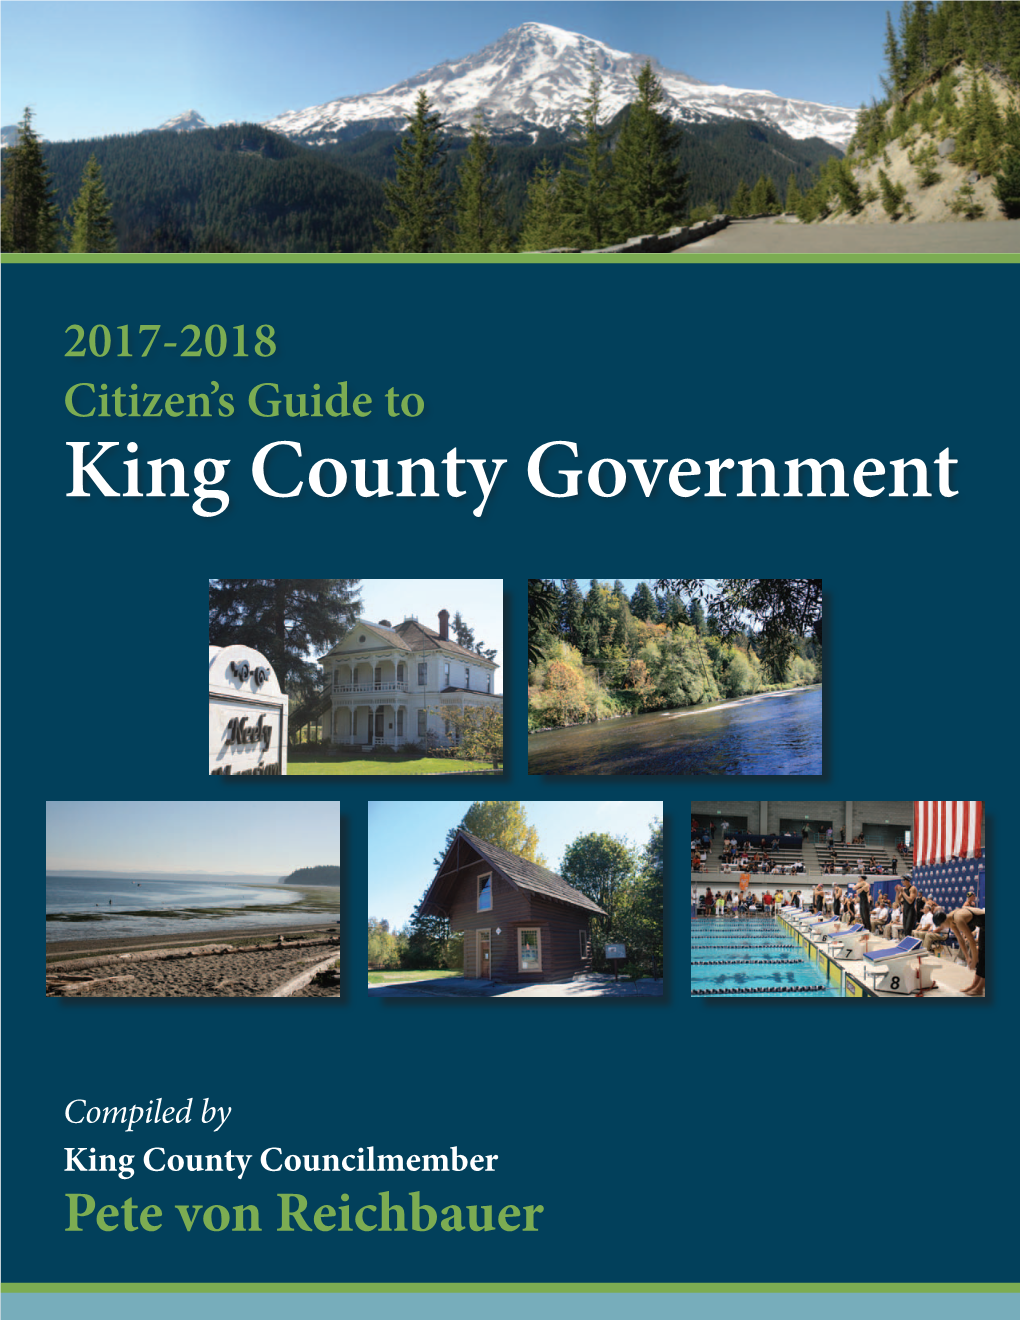 2017-2018 Citizen's Guide To